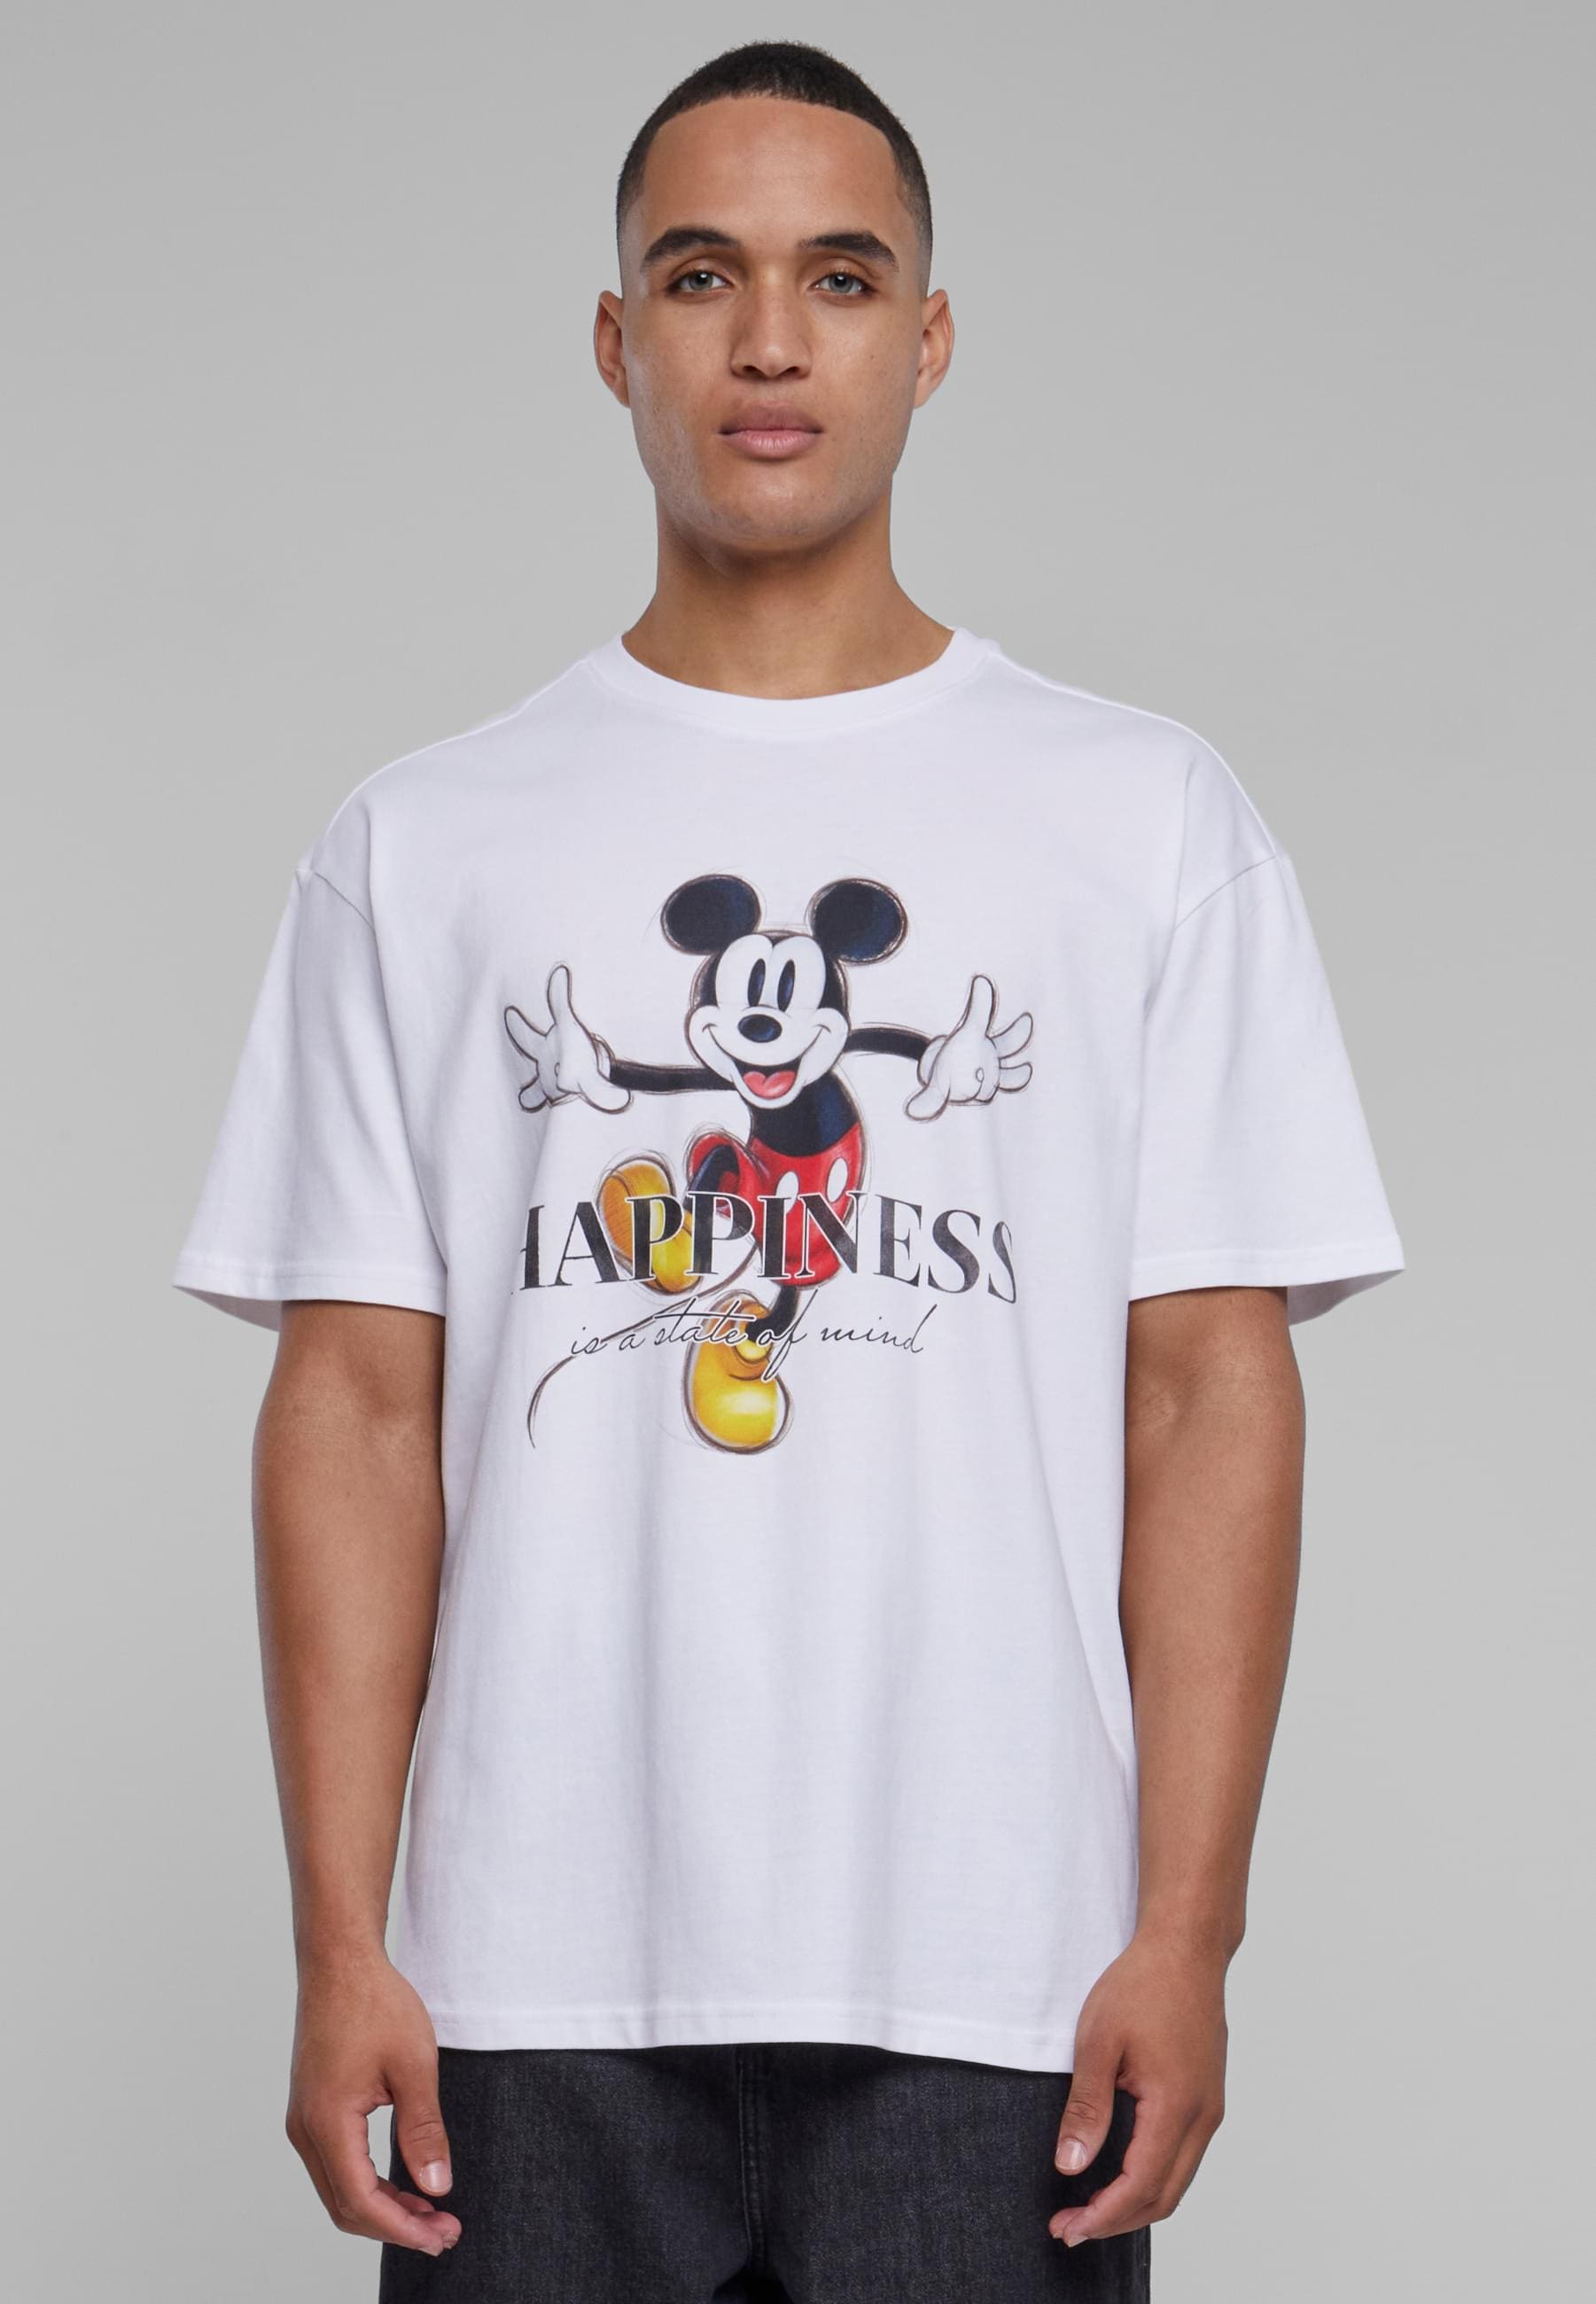 »Unisex Mister | (1 Tee«, tlg.) Oversize Mickey T-Shirt BAUR Upscale by kaufen Happiness 100 Tee Disney online